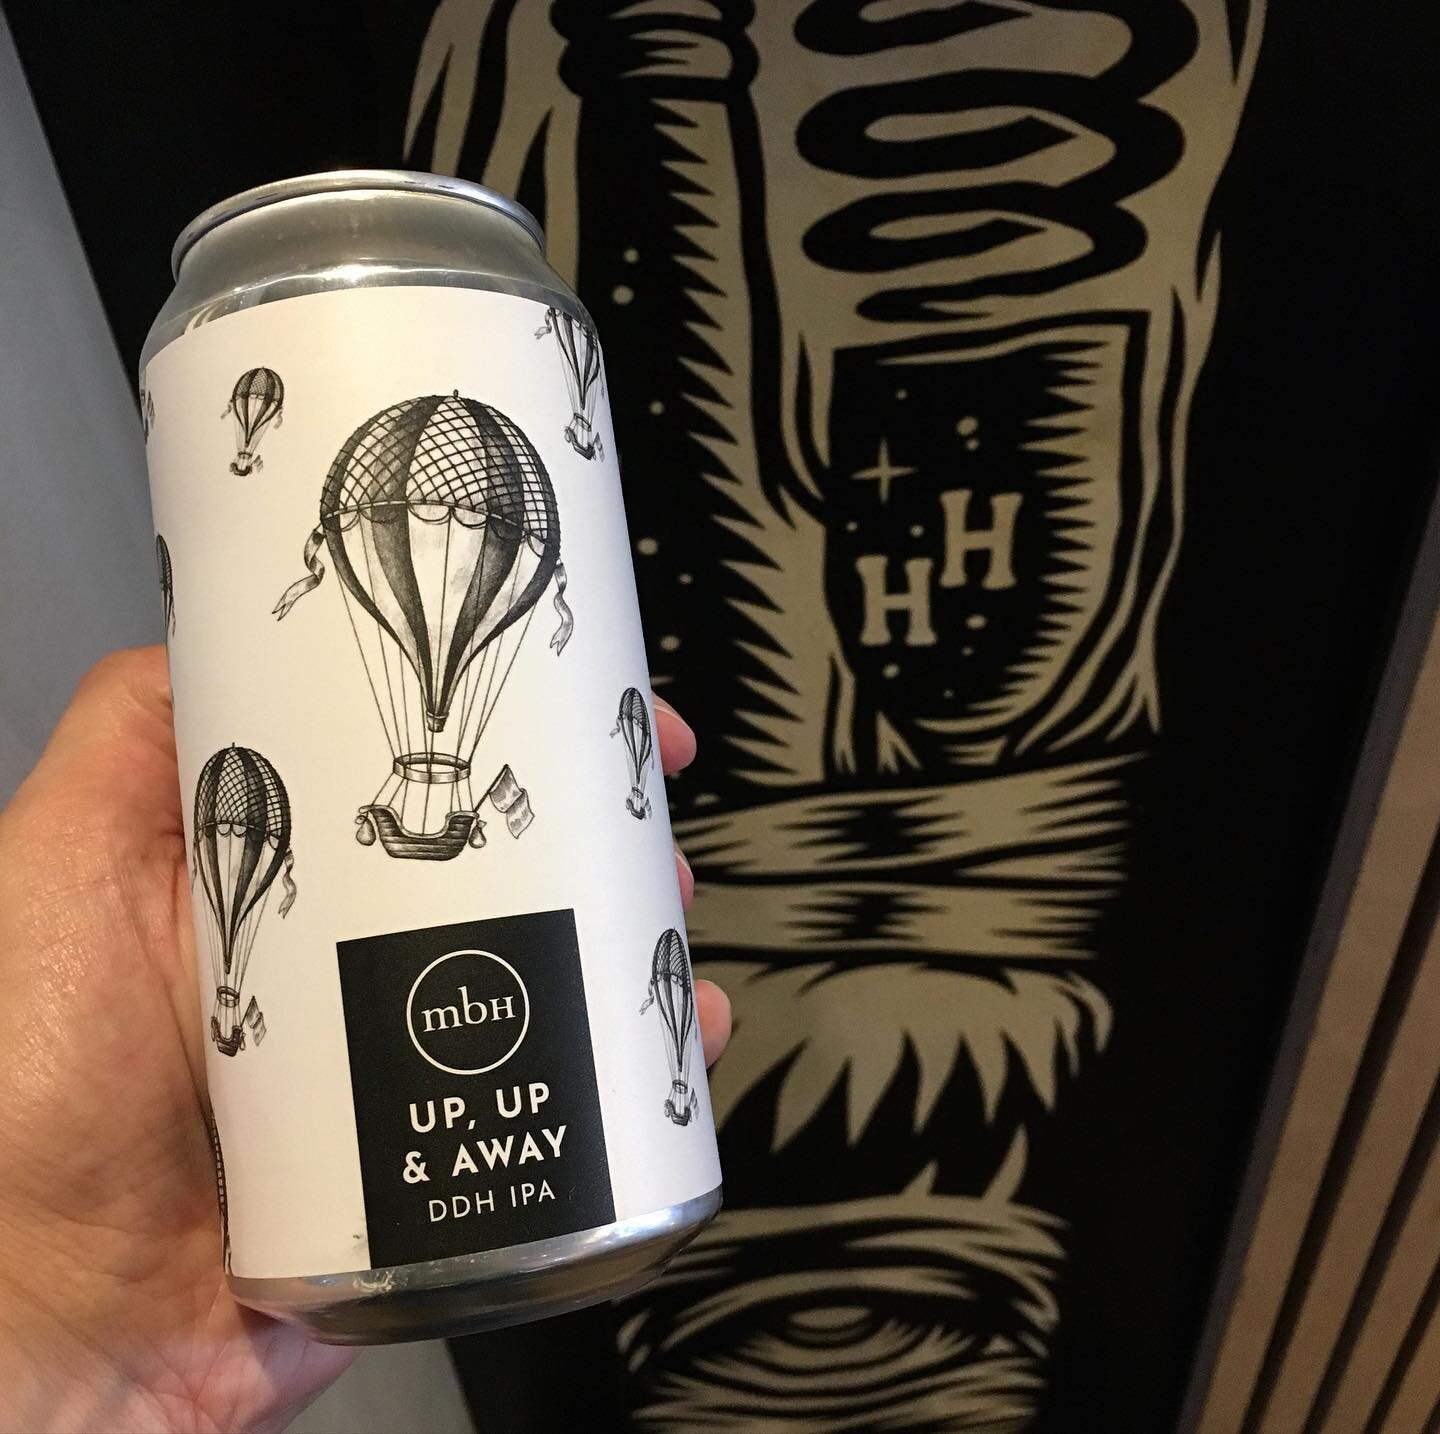 Hope you all had a great weekend (Tuesday is our Monday!) so we&rsquo;re starting a new week afresh with this juicy double dry-hopped IPA from @mobberleybeer 🎈Mobberley Brewhouse Up, Up &amp; Away 7% 440ml can.
.
DDH Loral, Citra &amp; HBC692 IPA
.?